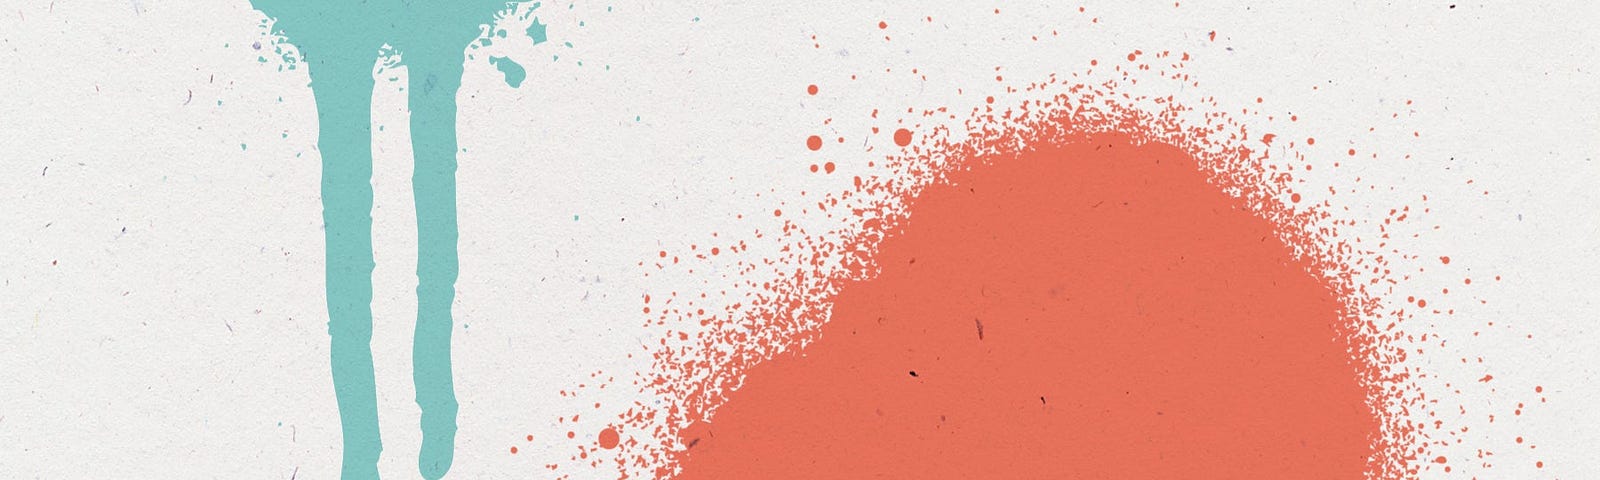 A cover of Rachel Zucker’s Poetics of Wrongness, which features two paint splatters in blue and orange on a white background, with the title appearing over it.